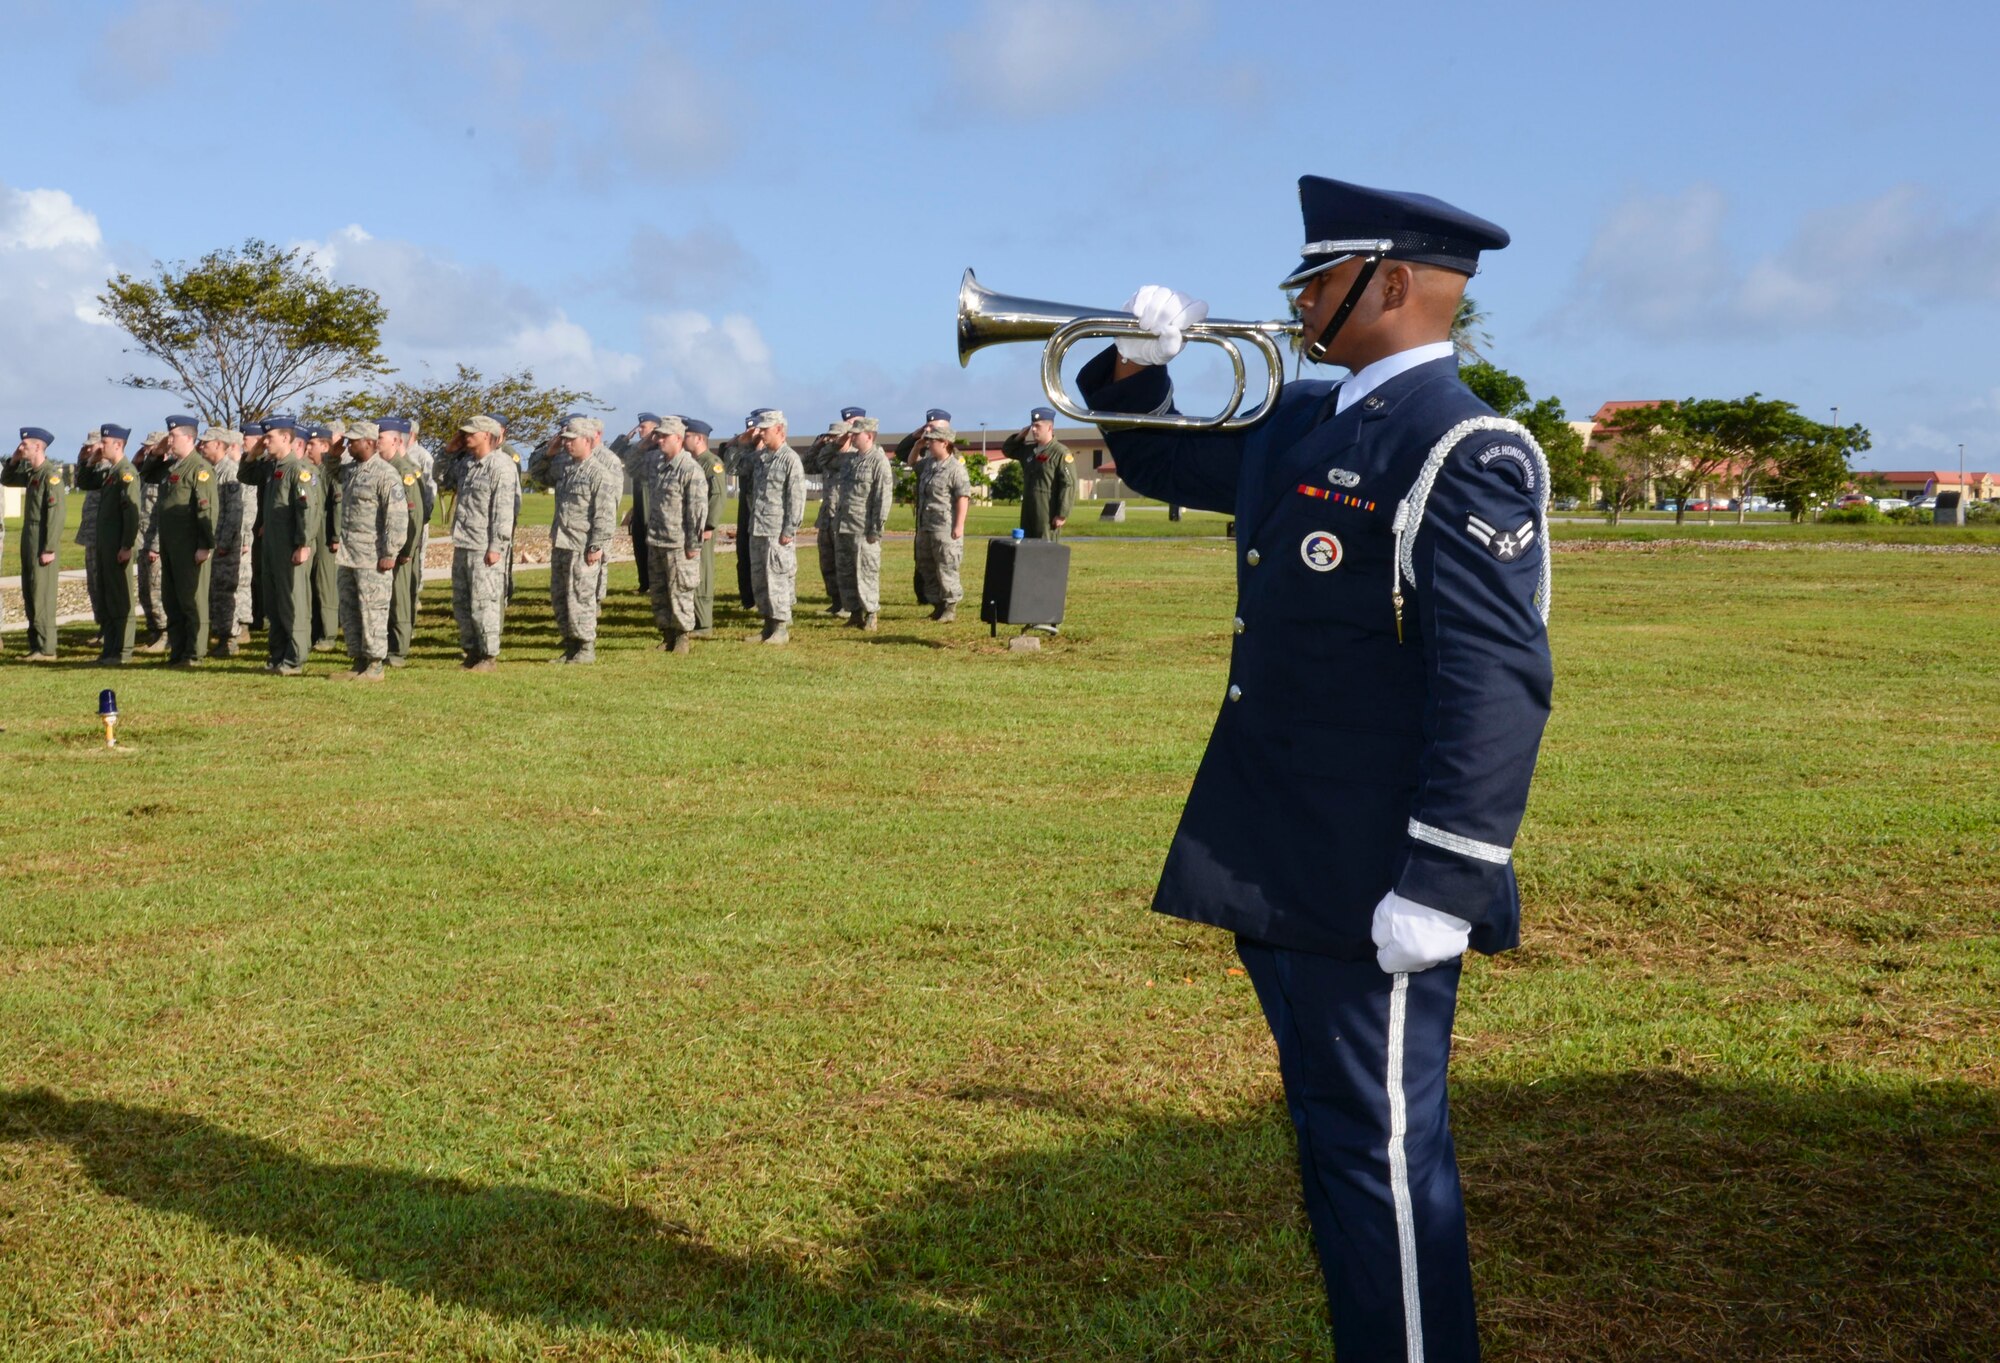 Airman 1st Class Anthony Smith-Nelson, Andersen Air Force Base Honor Guard, plays taps during the Operation Linebacker II Remembrance Ceremony Dec. 18, 2014, at Andersen AFB, Guam. The ceremony commemorated the 75 Airmen that lost their lives during the operation including 33 who were lost from 15 downed B-52 Stratofortress bombers.(U.S. Air Force photo by Staff Sgt. Robert Hicks/Released)  